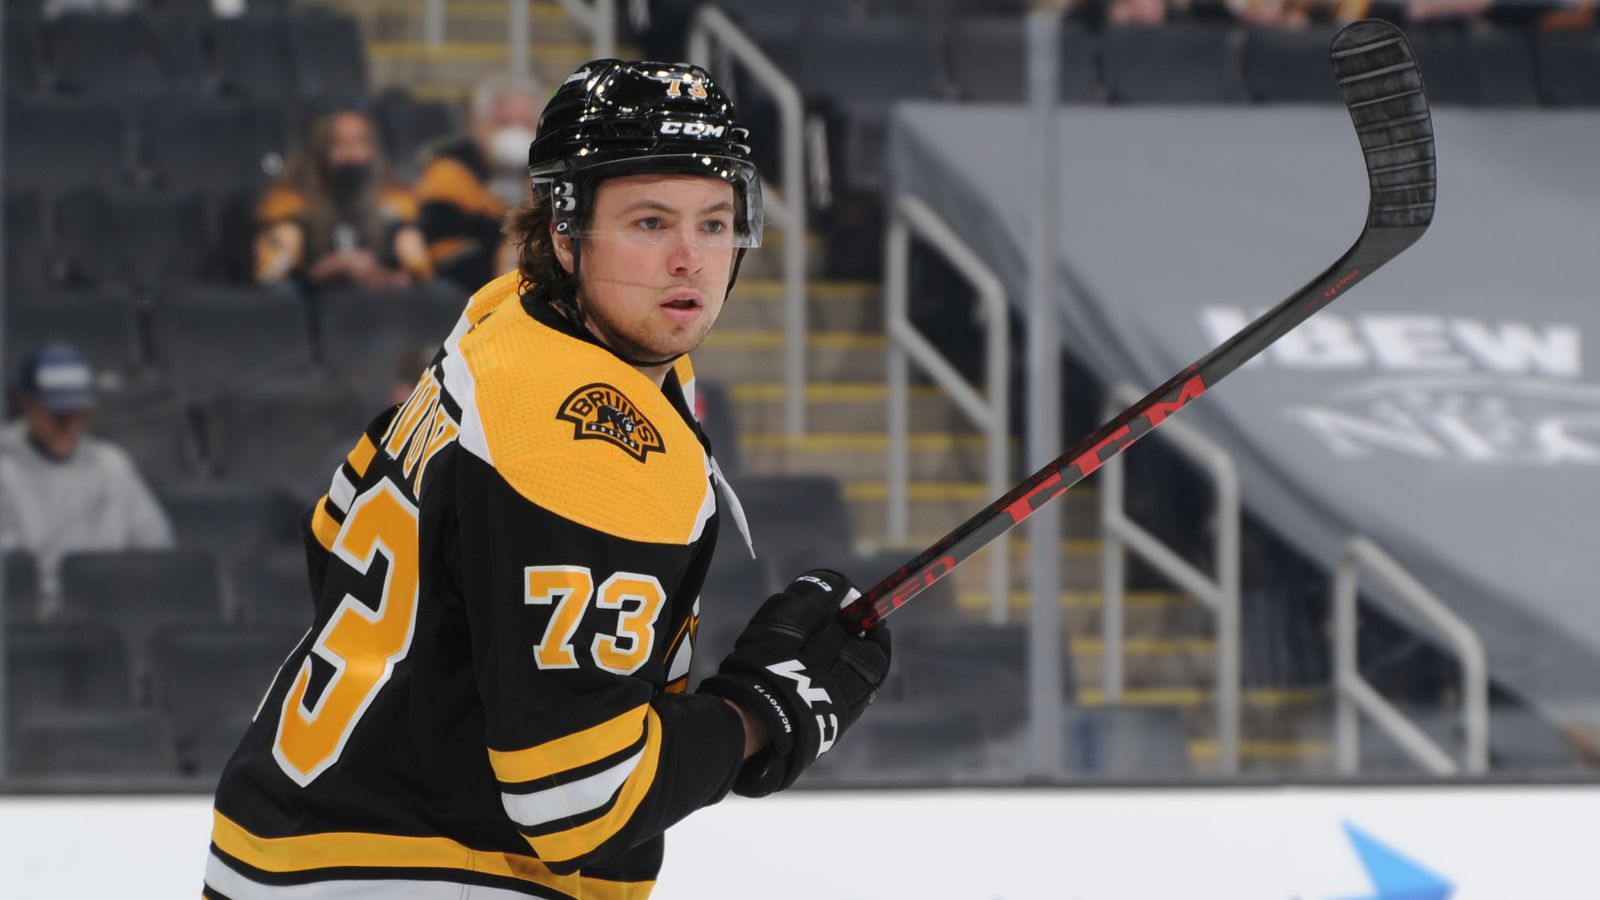 We're not losing sleep over it': Charlie McAvoy's no-goal season